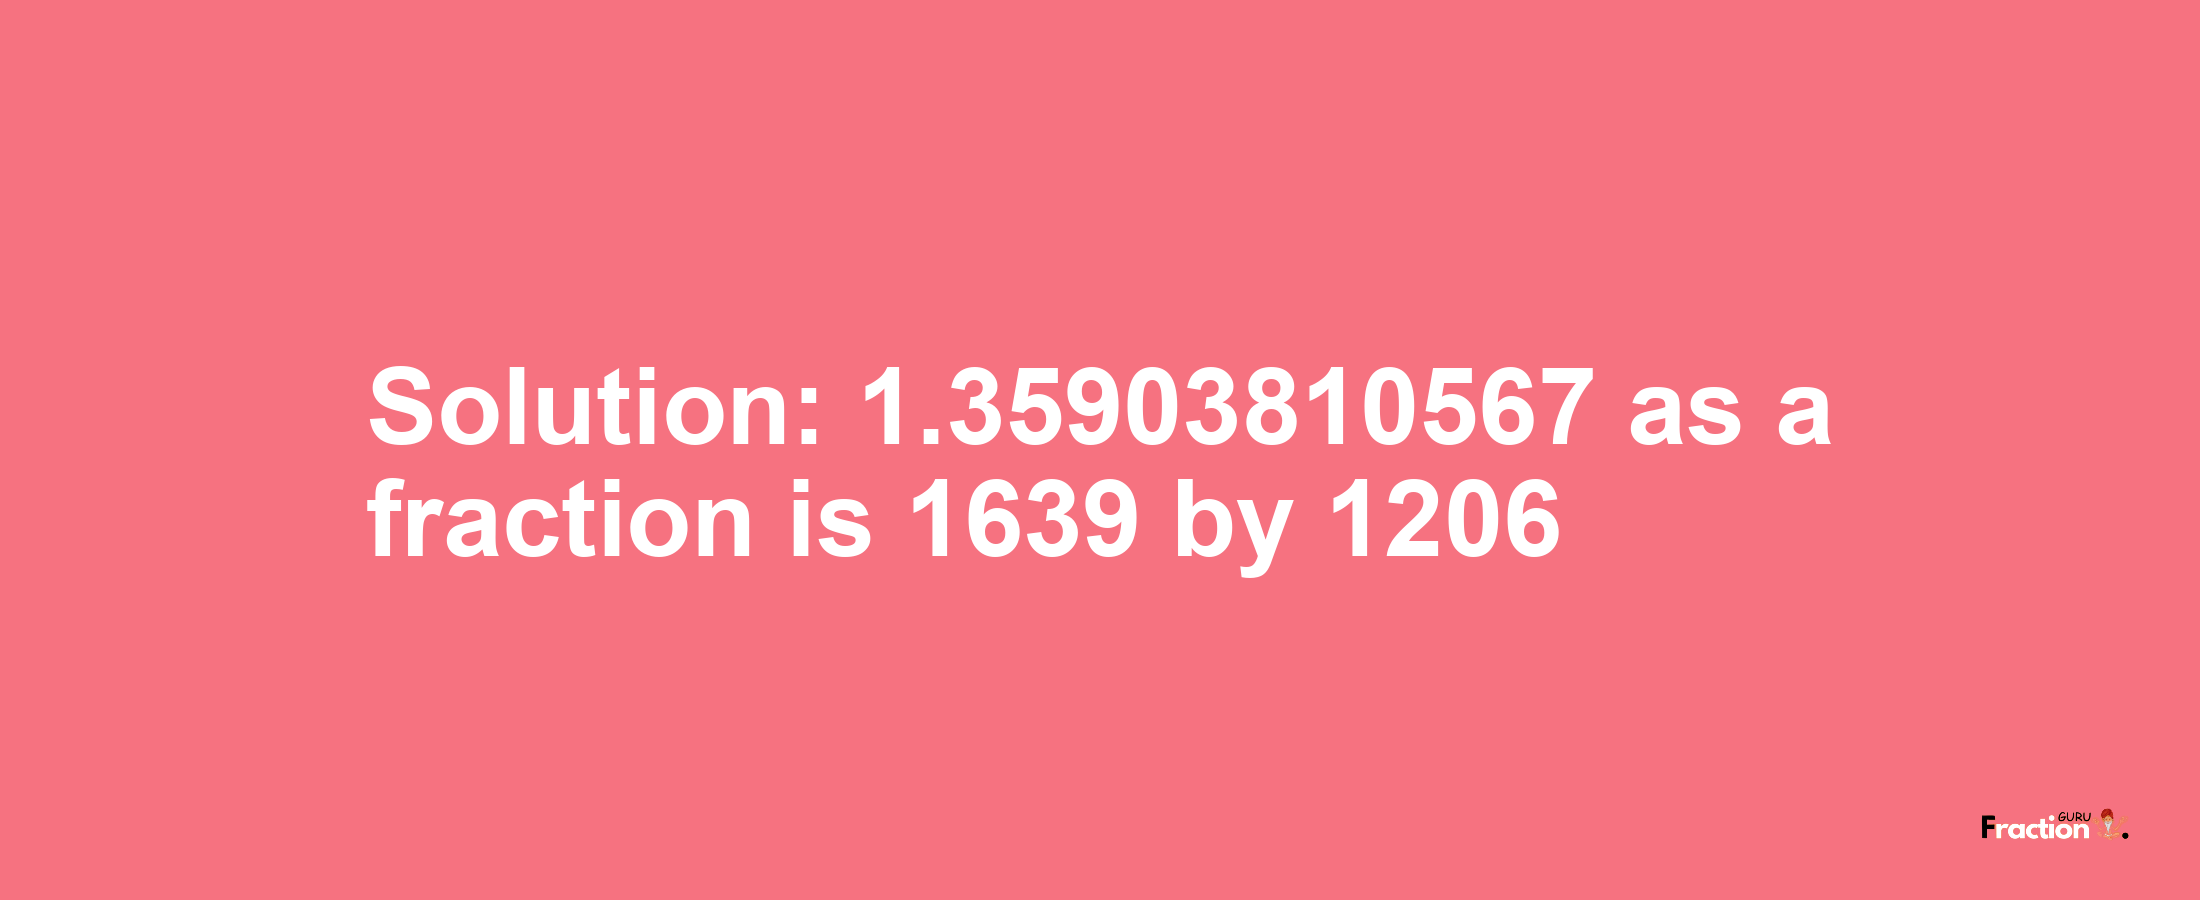 Solution:1.35903810567 as a fraction is 1639/1206